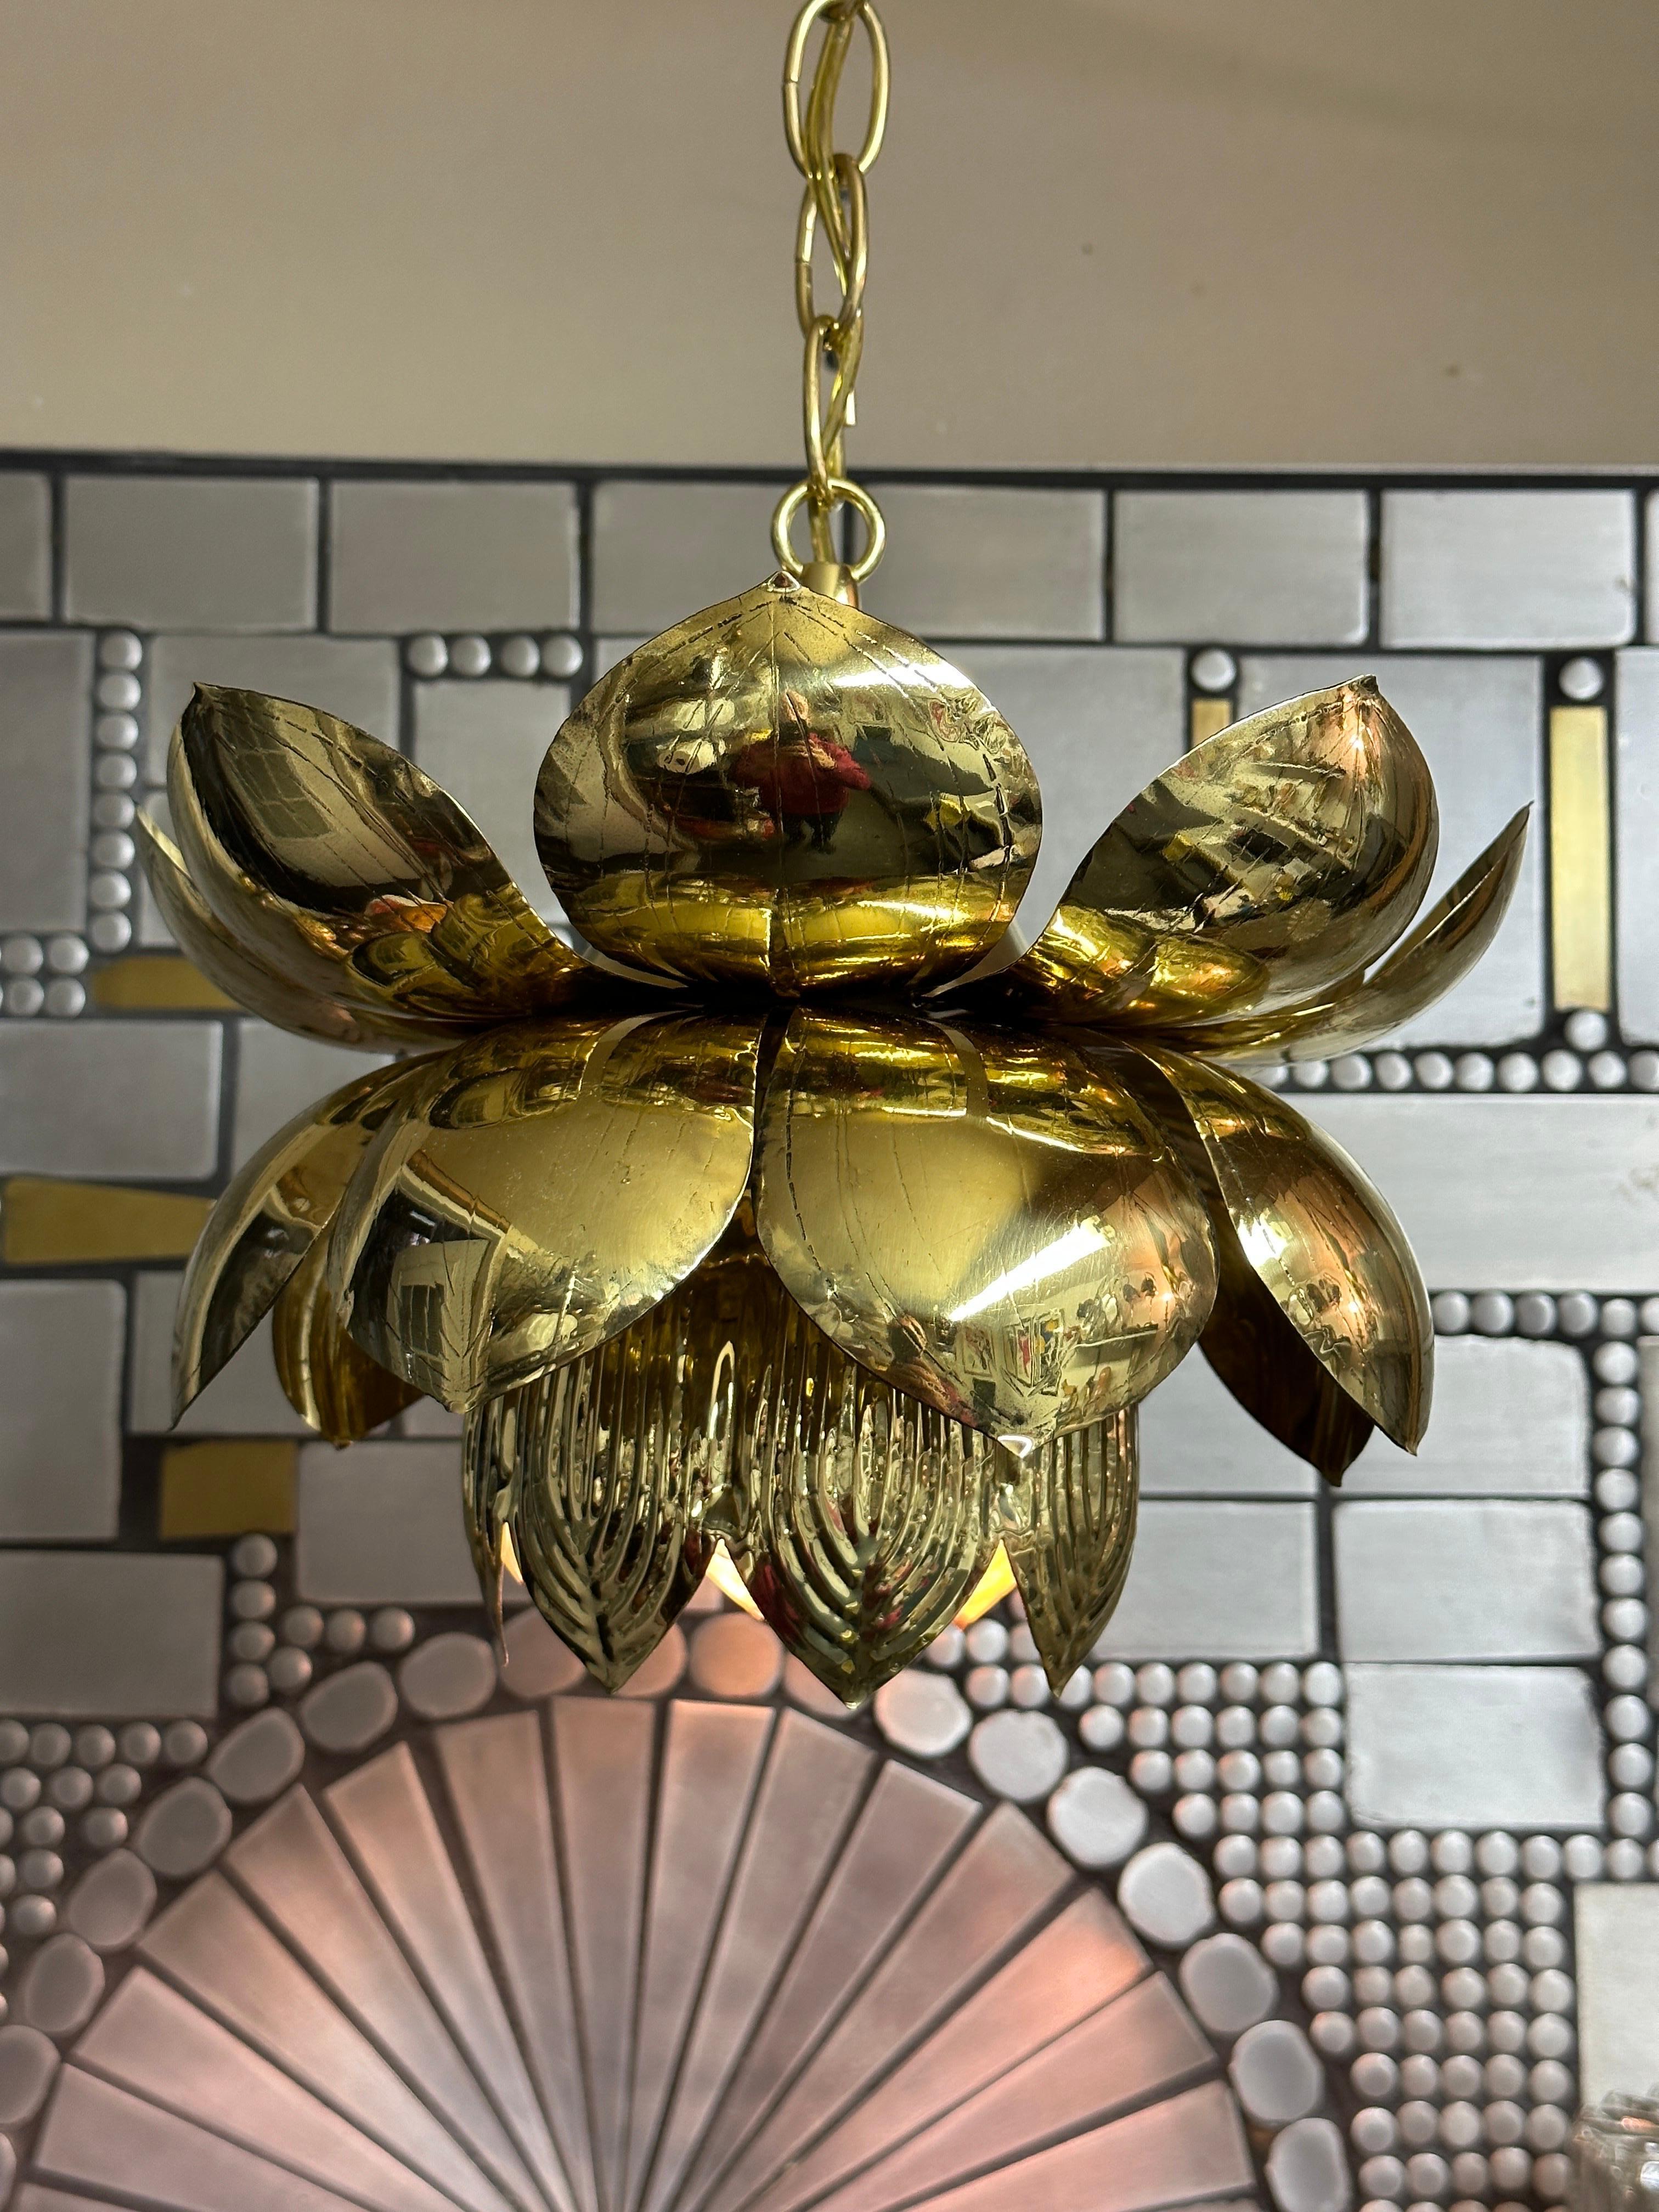 Polished brass lotus hanging pendant light by Feldman. Lotus is 10” diameter by 8” high. Chain is 40” and can be adjusted to your desired height.